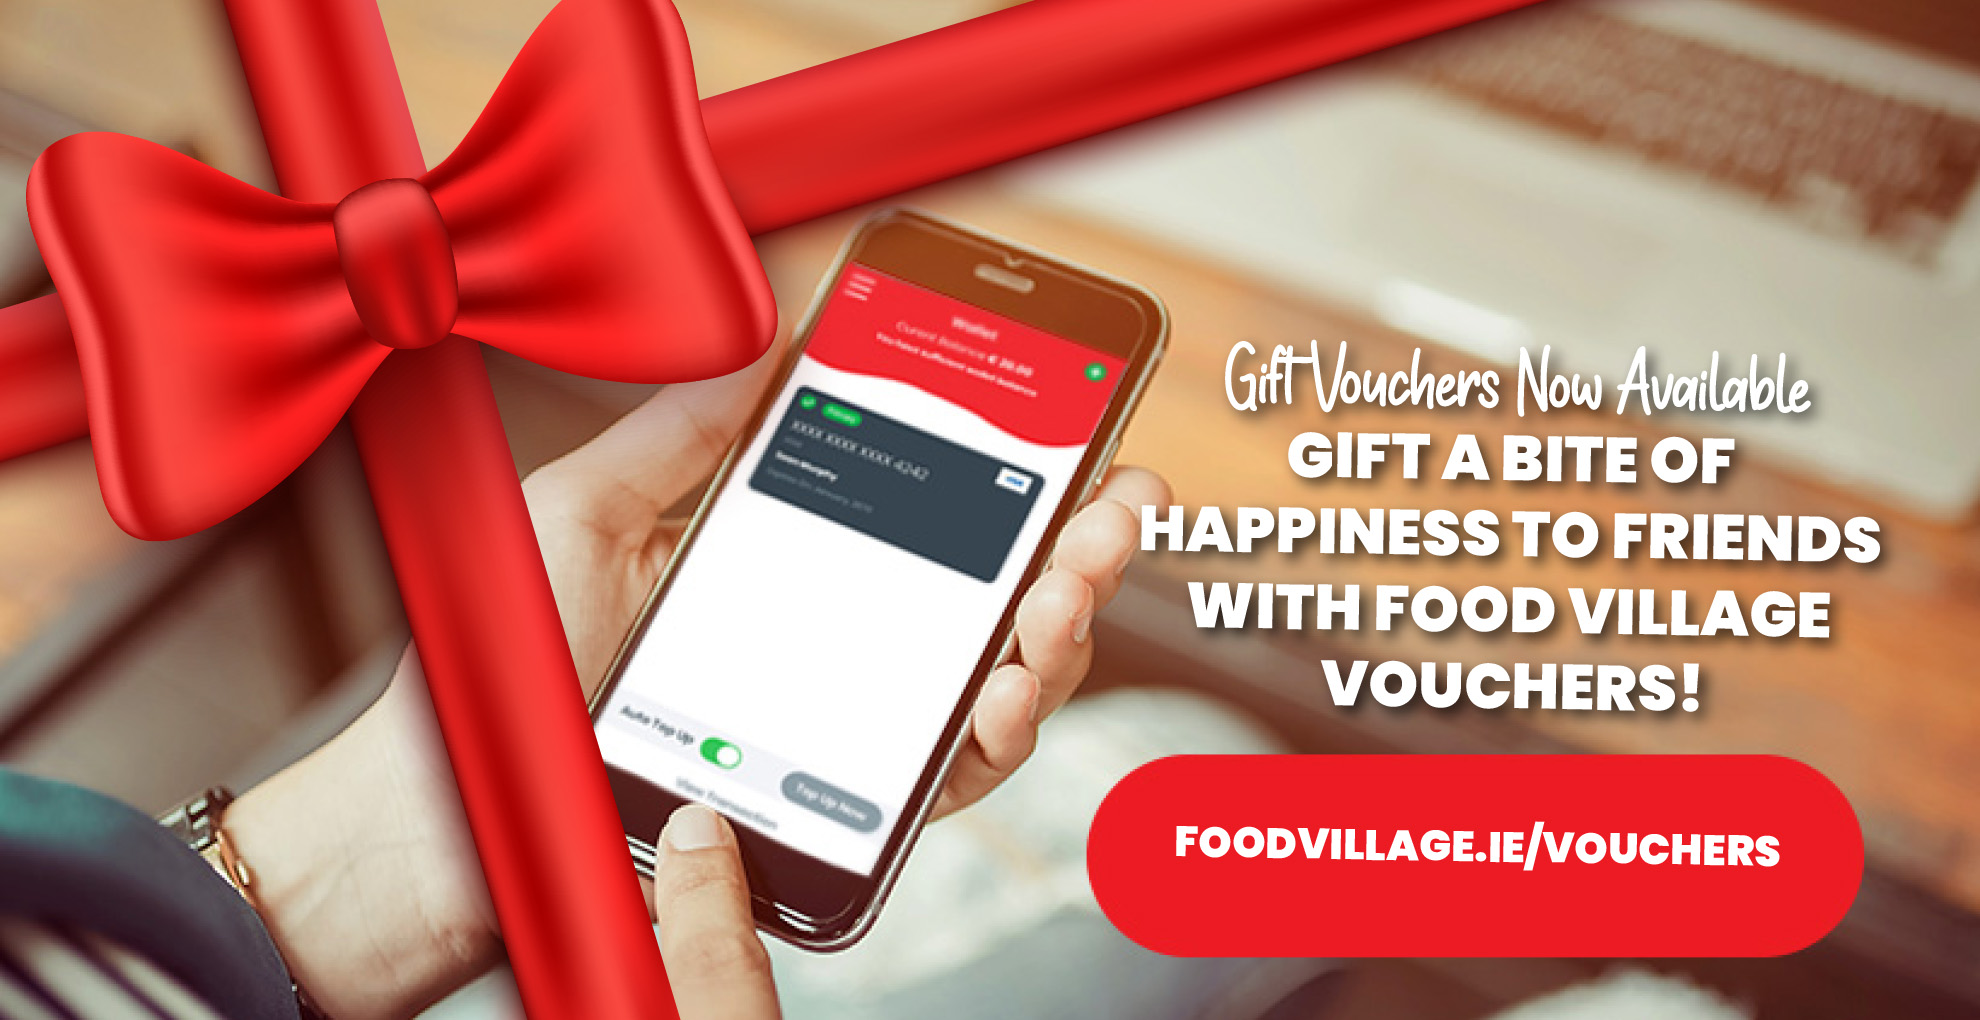 Download Food Village from the Google Play